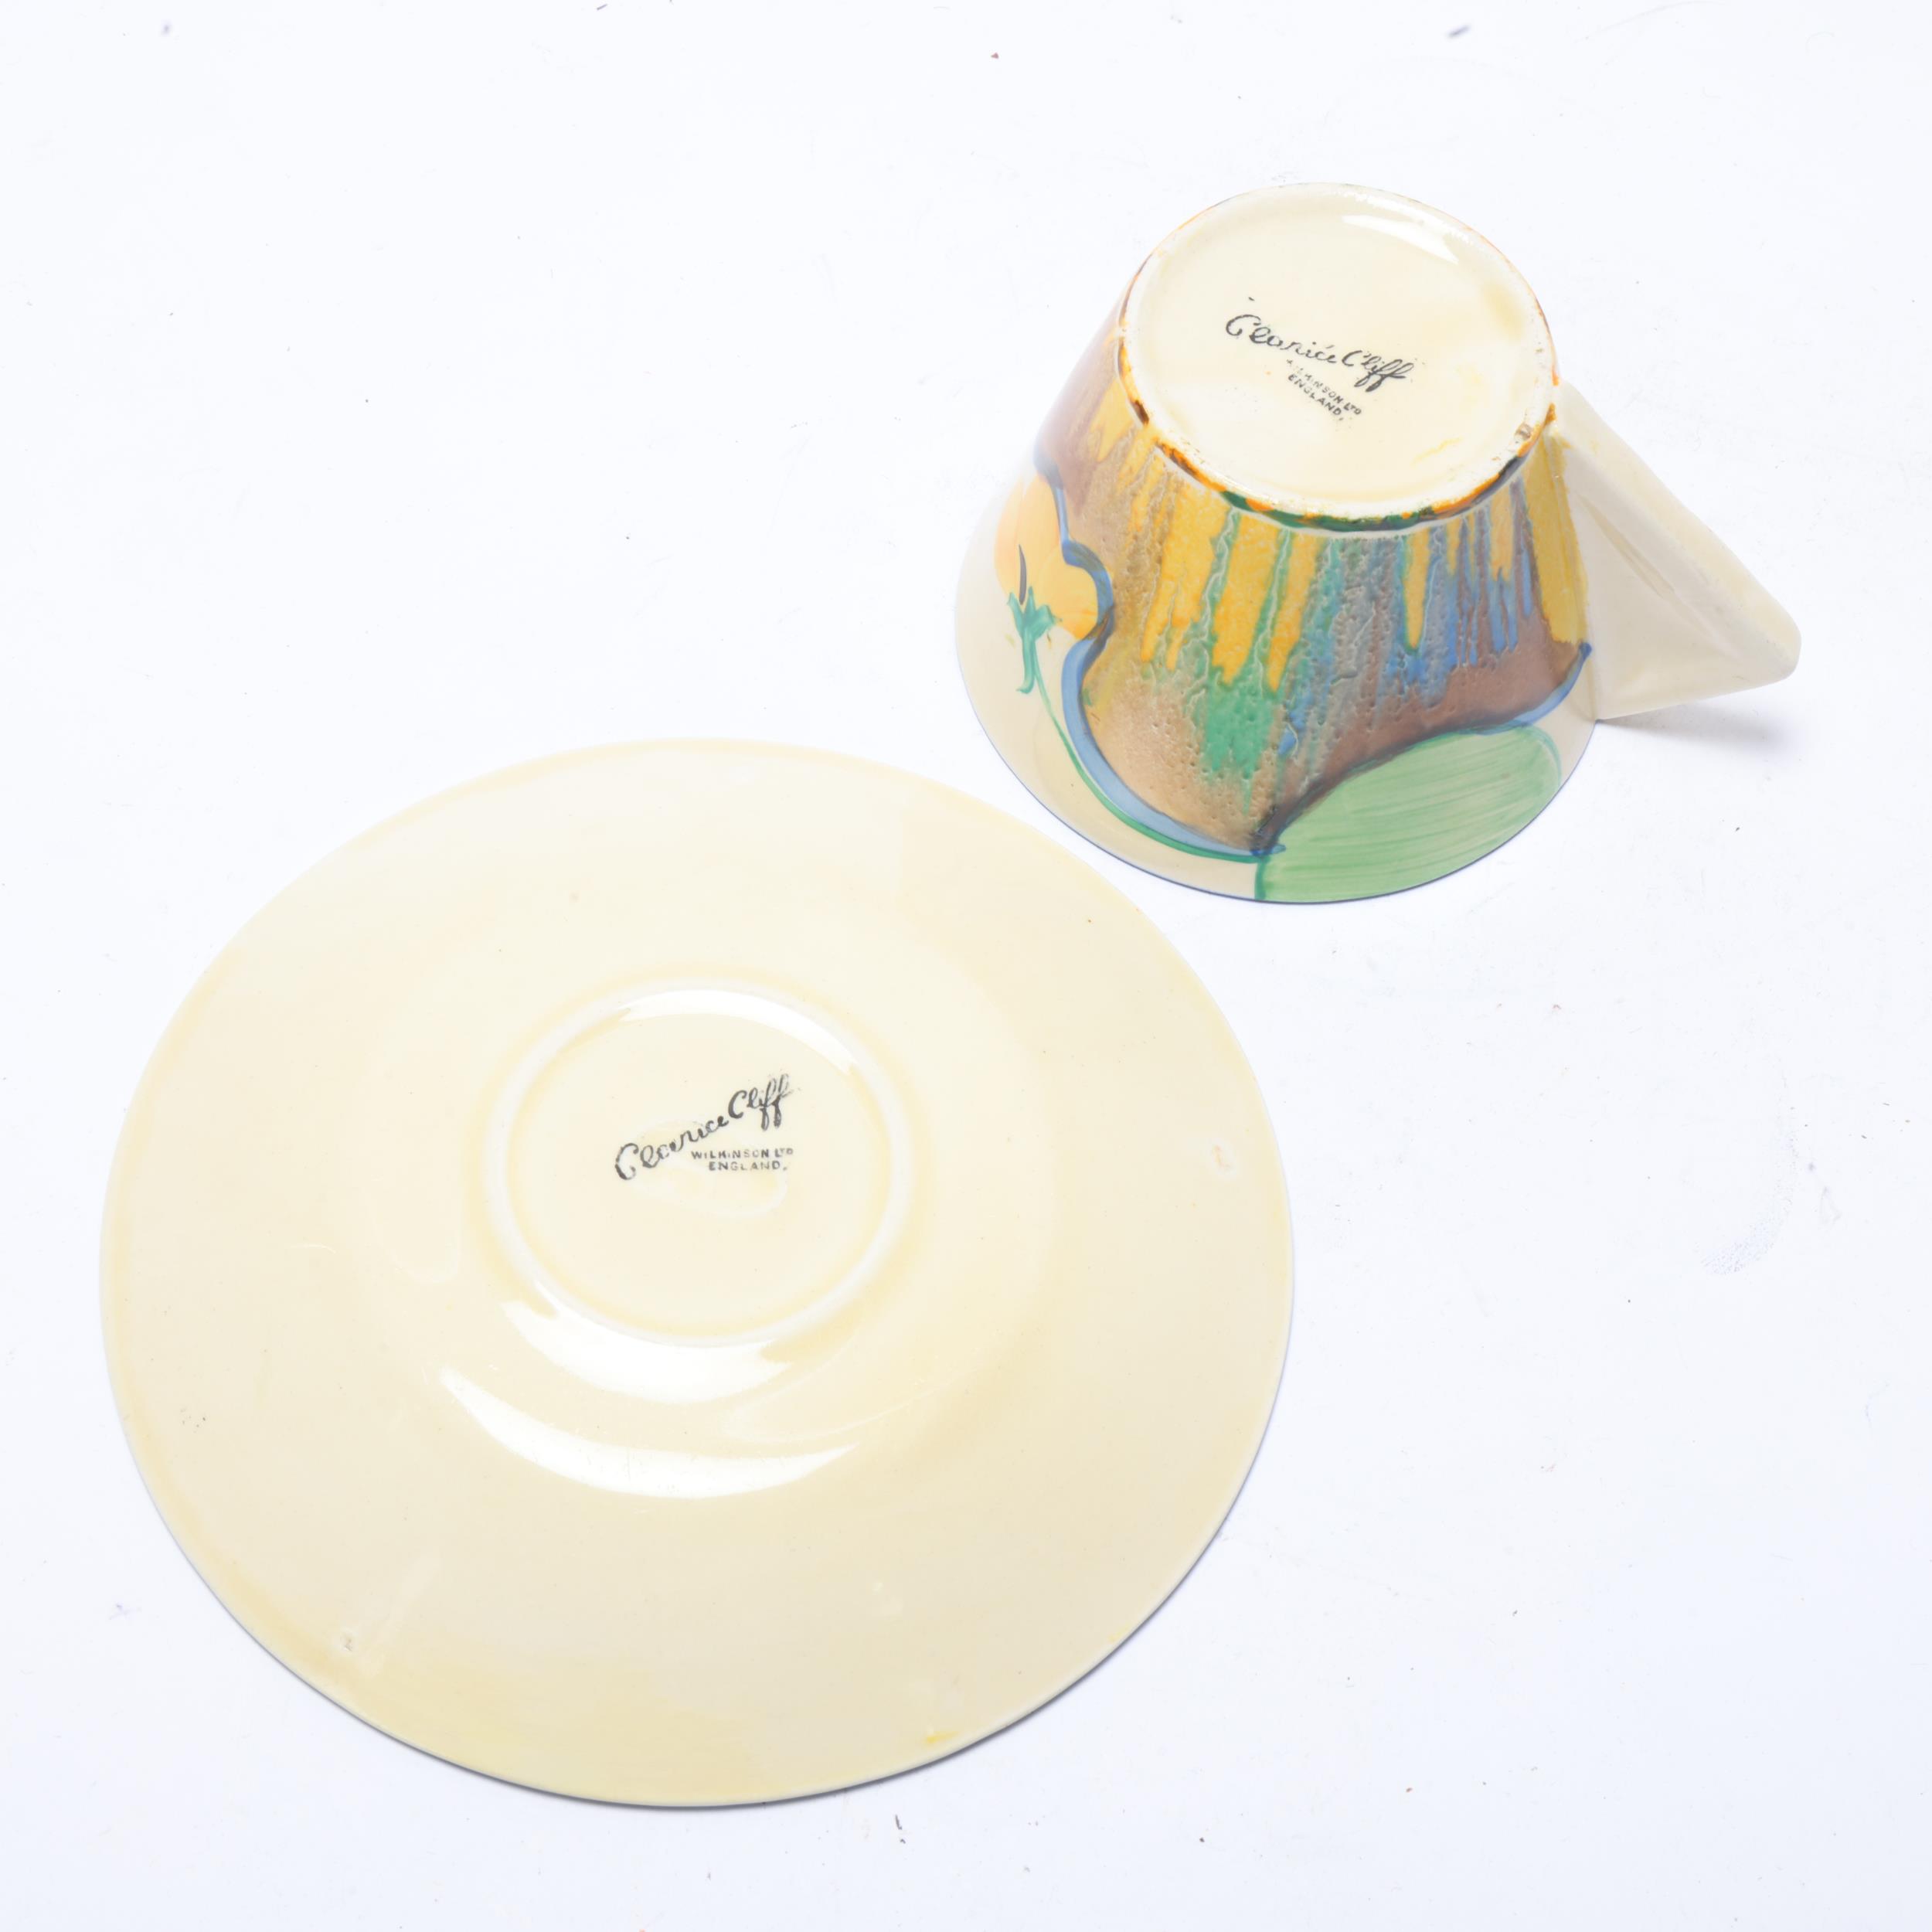 Clarice Cliff Delicia Pansies cup and saucer, saucer diameter 14.5cm Good condition, no chips cracks - Image 3 of 3